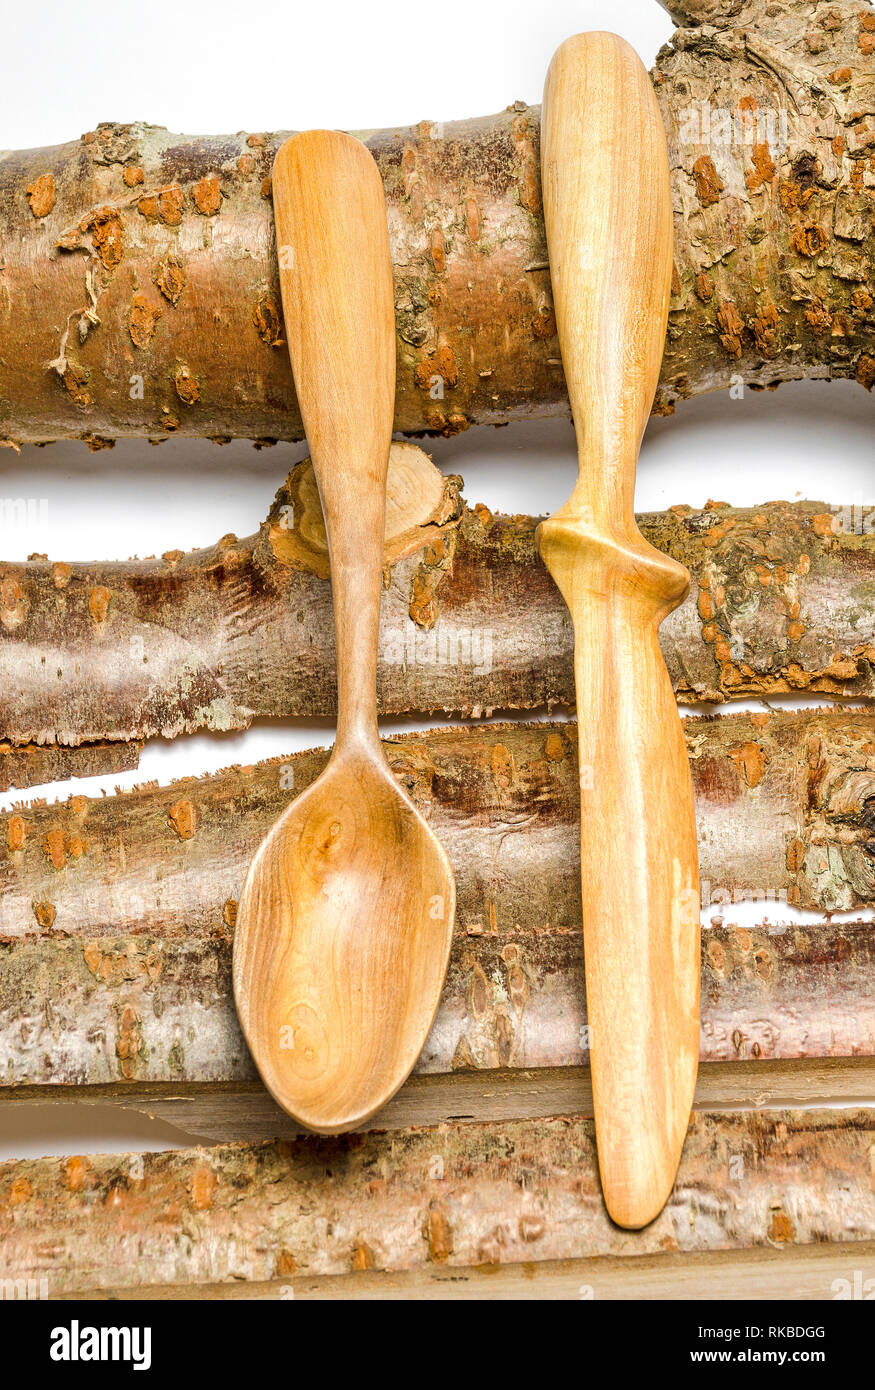 urban wood carving spoon and knife cherry wood Stock Photo